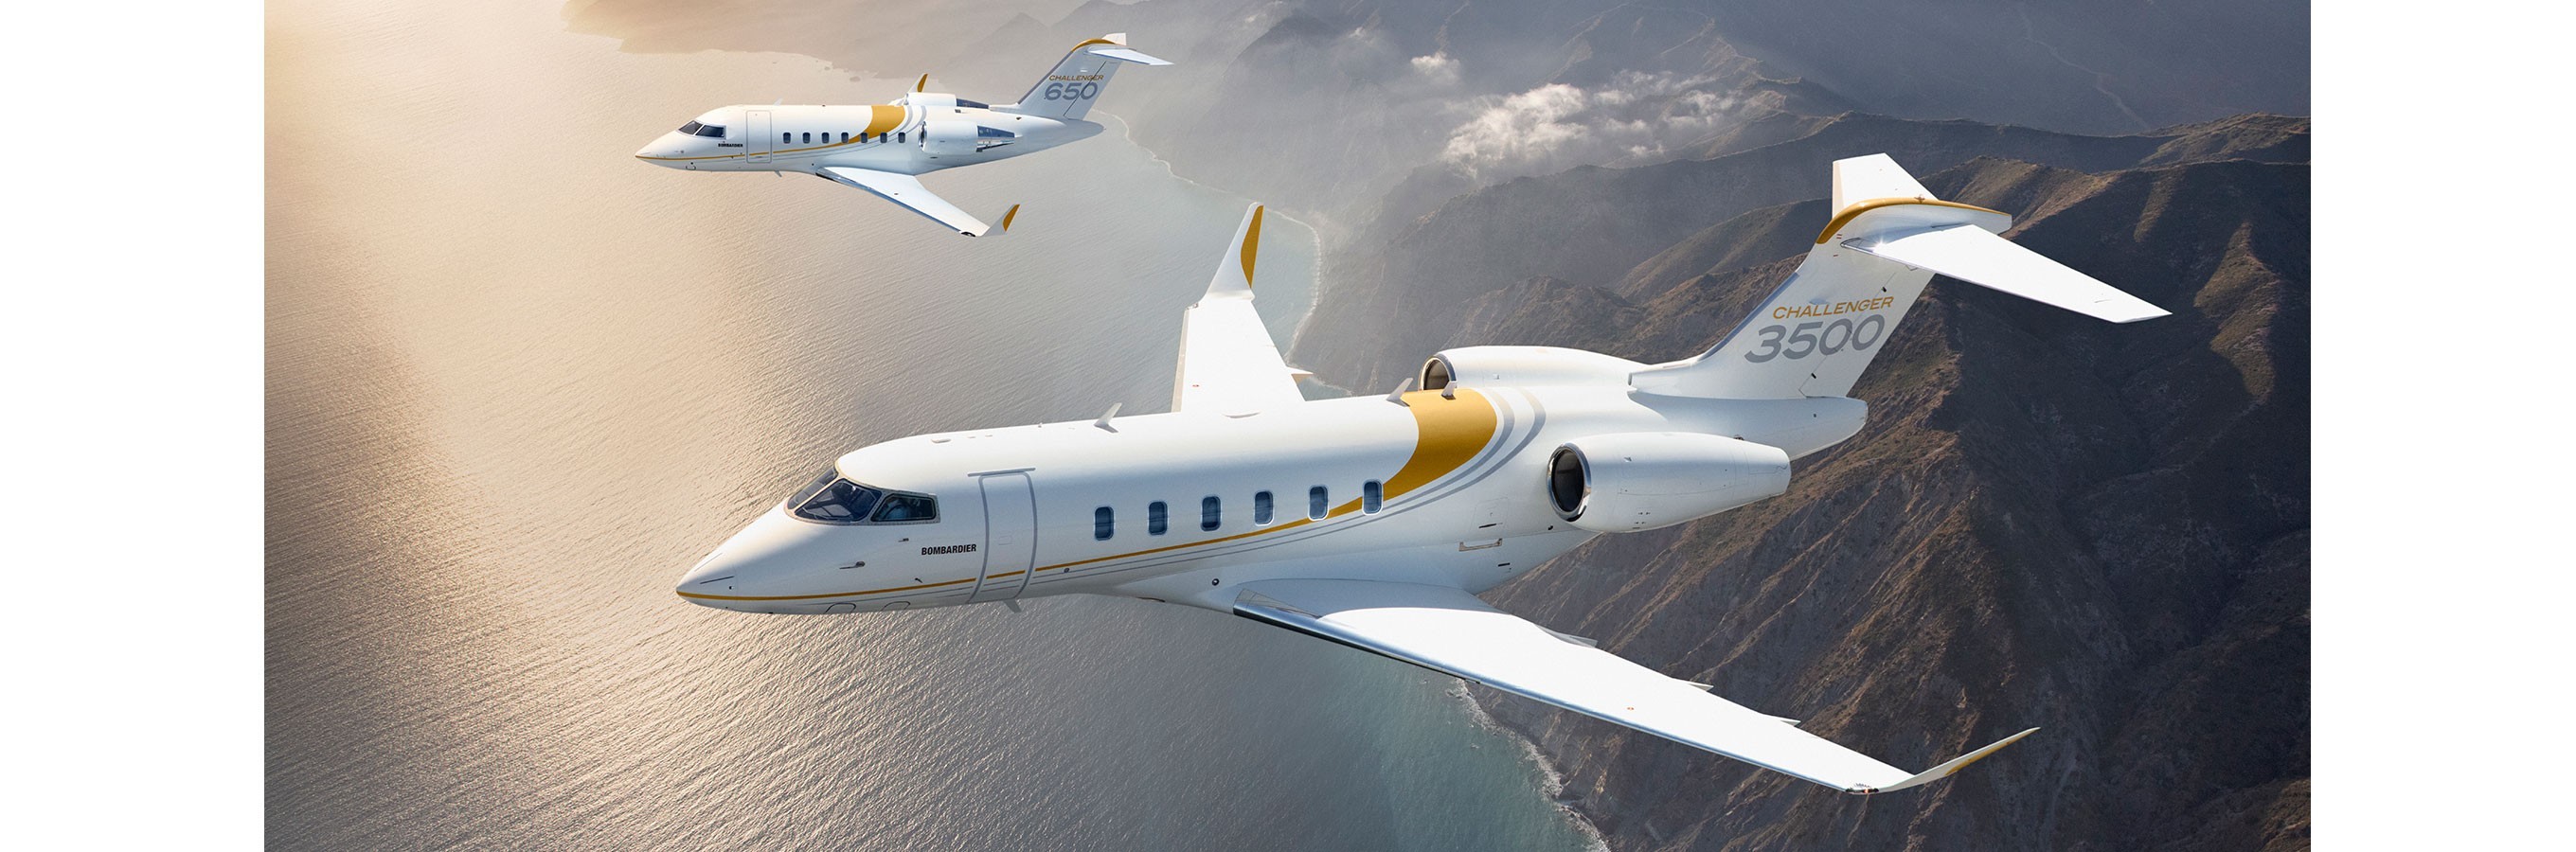 Getting to know the Challenger aircraft family